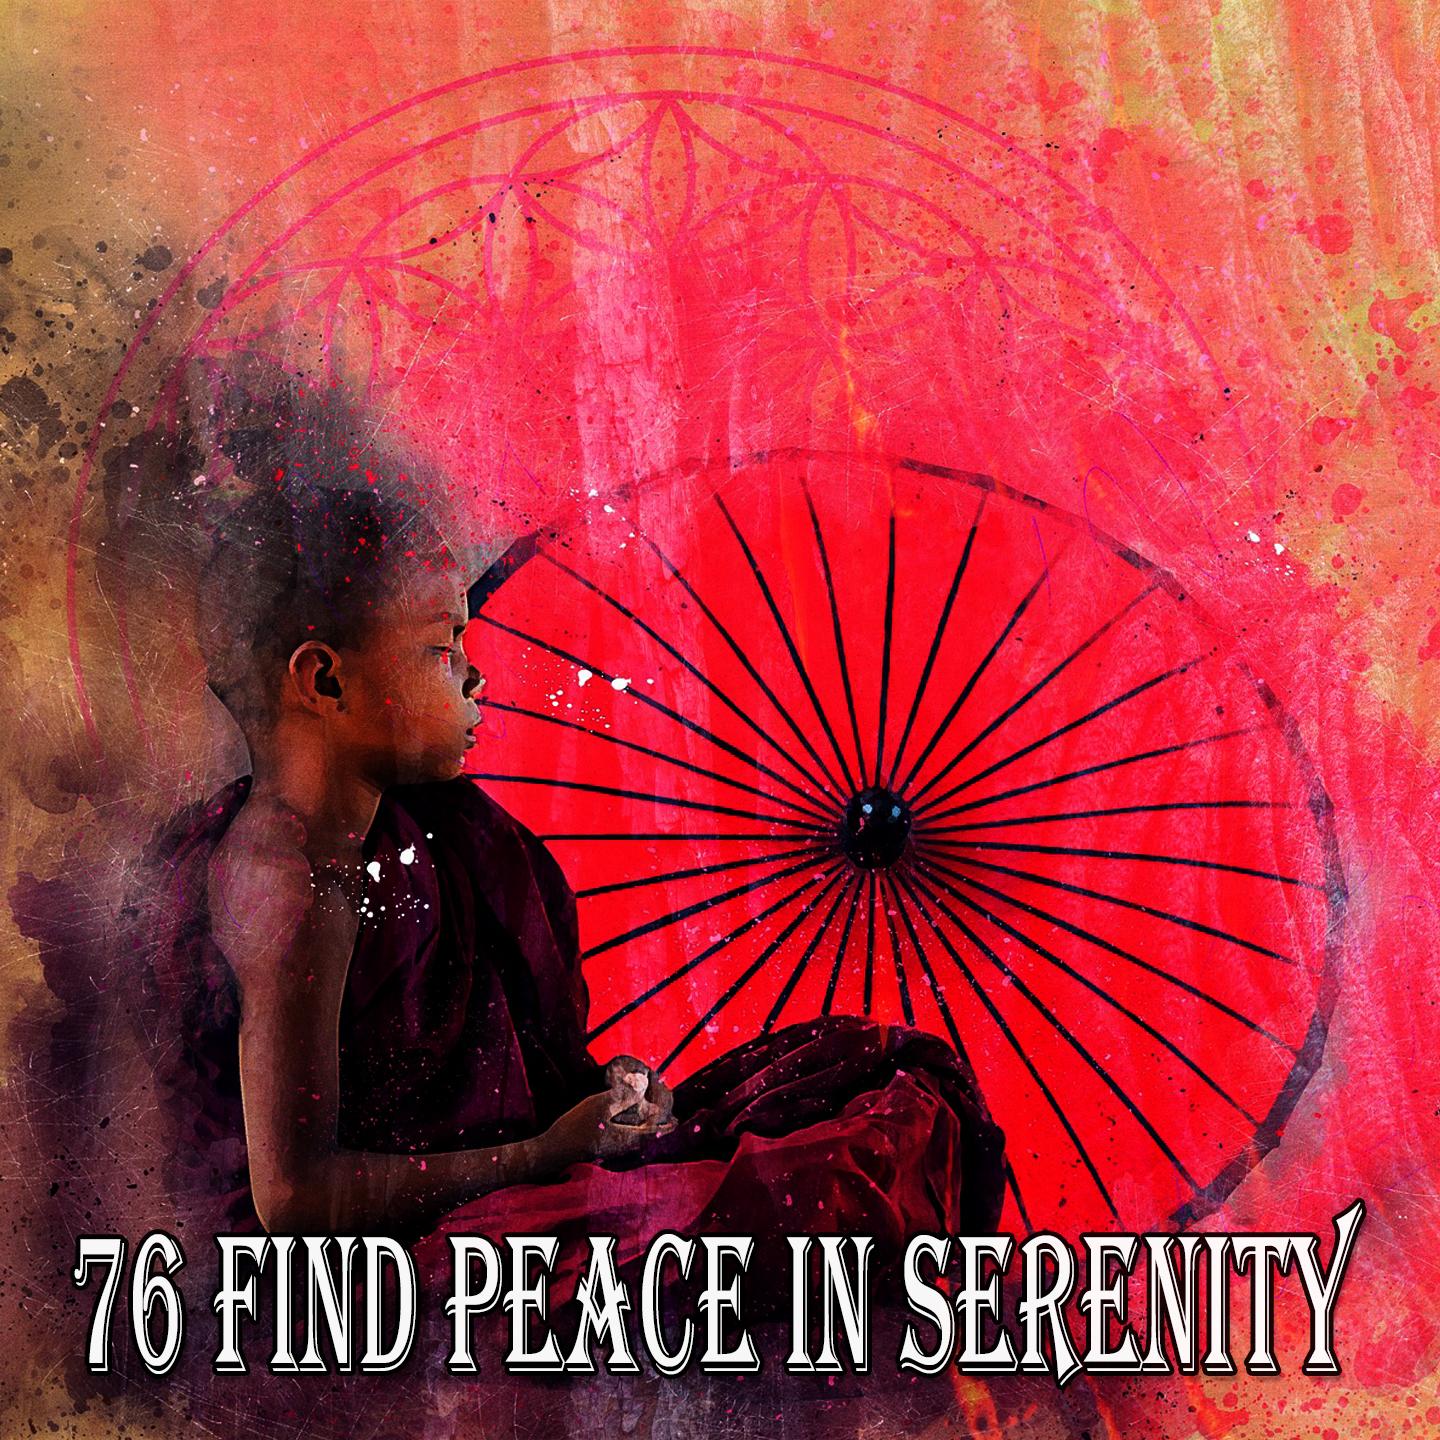 76 Find Peace in Serenity